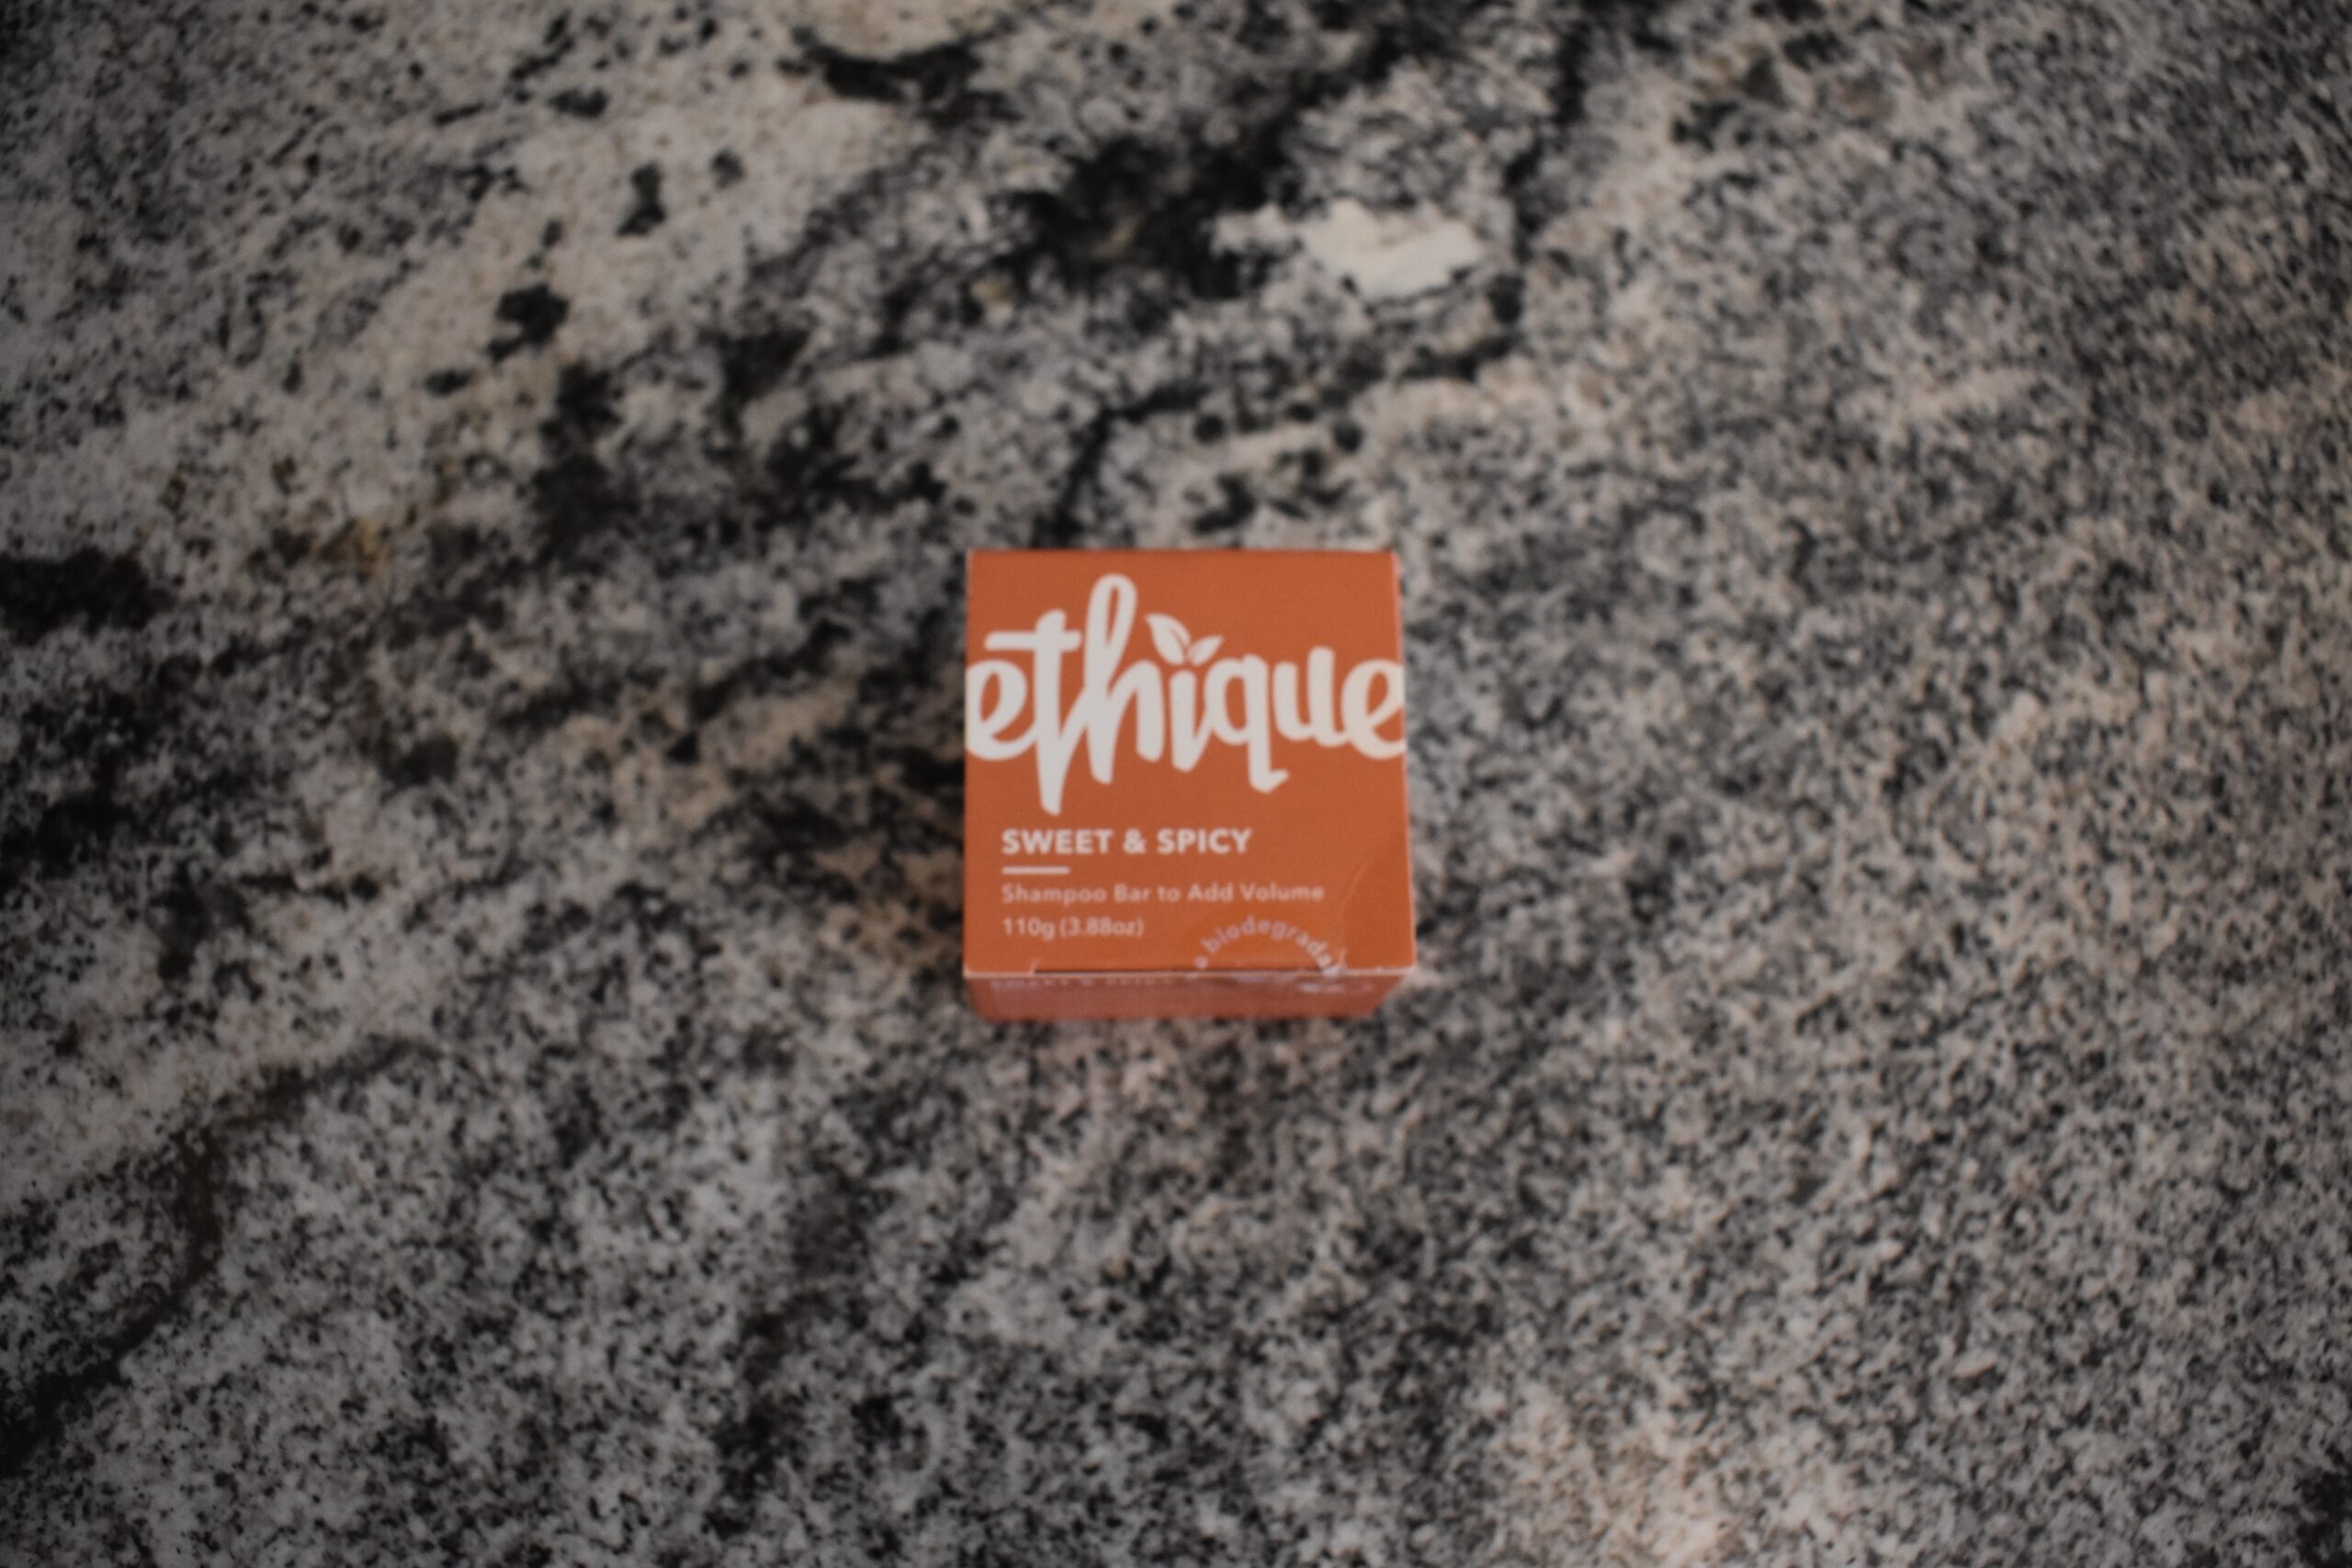 The ethique shampoo bar (one of the best shampoos) on my counter